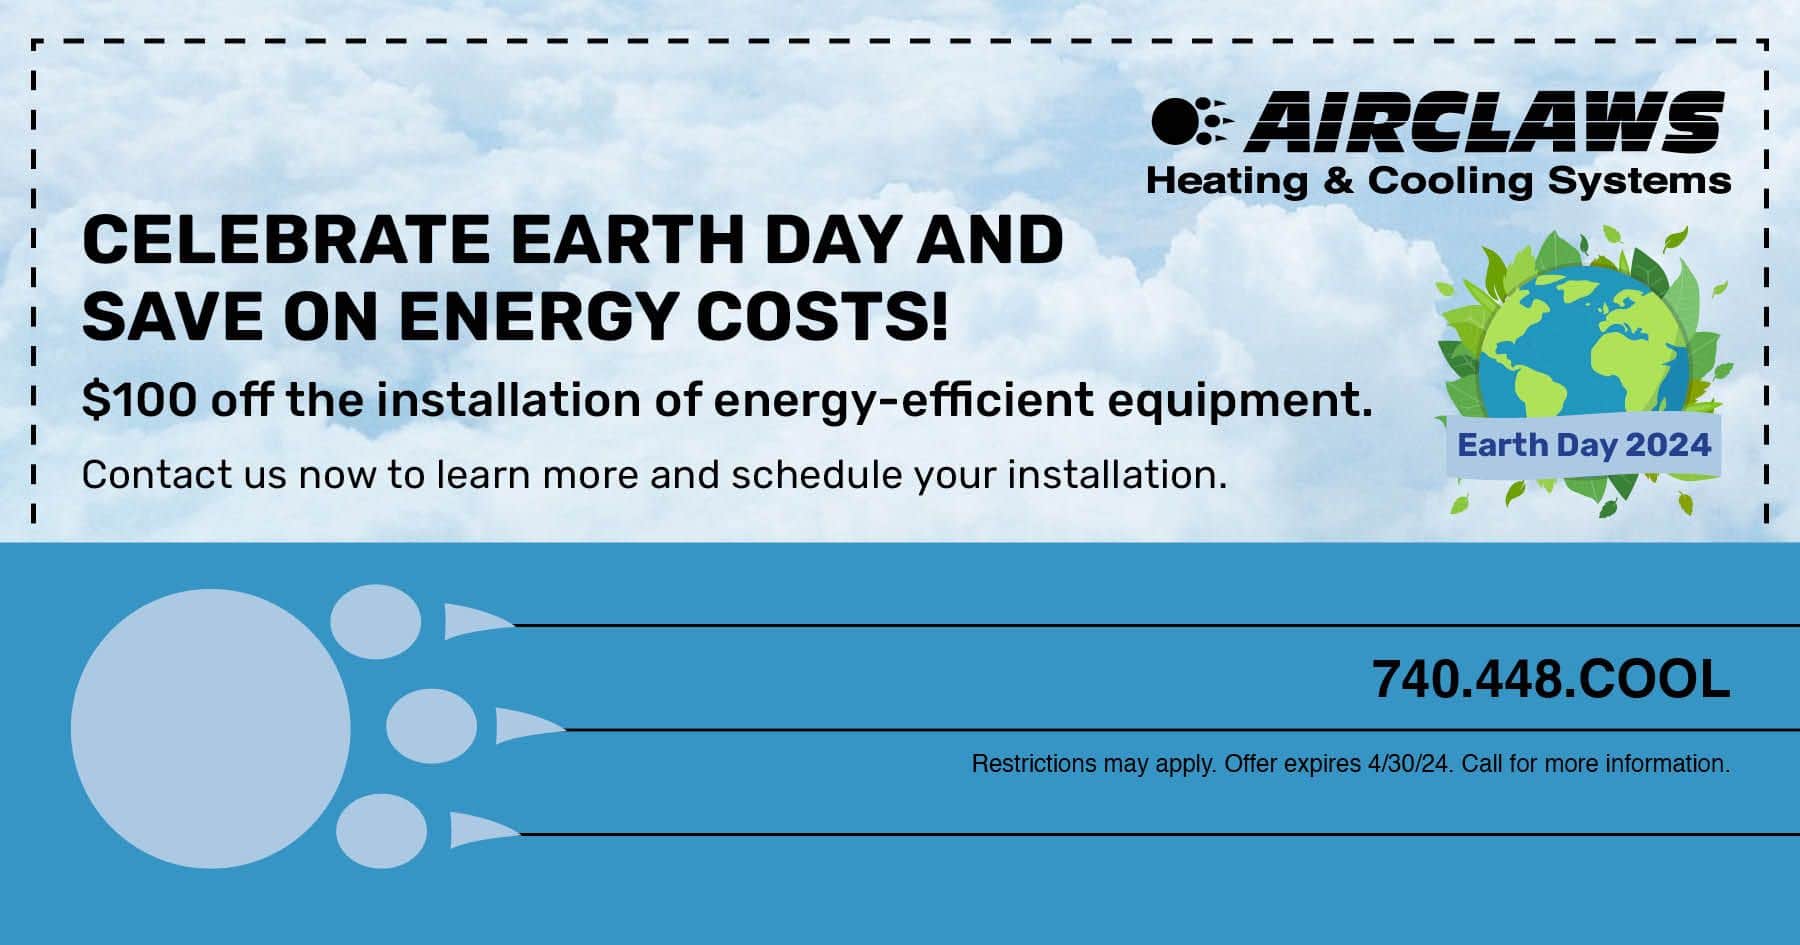 Airclaws HVAC coupon to celebrate Earth Day 2024. 0 off the installation of energy-efficient equipment.